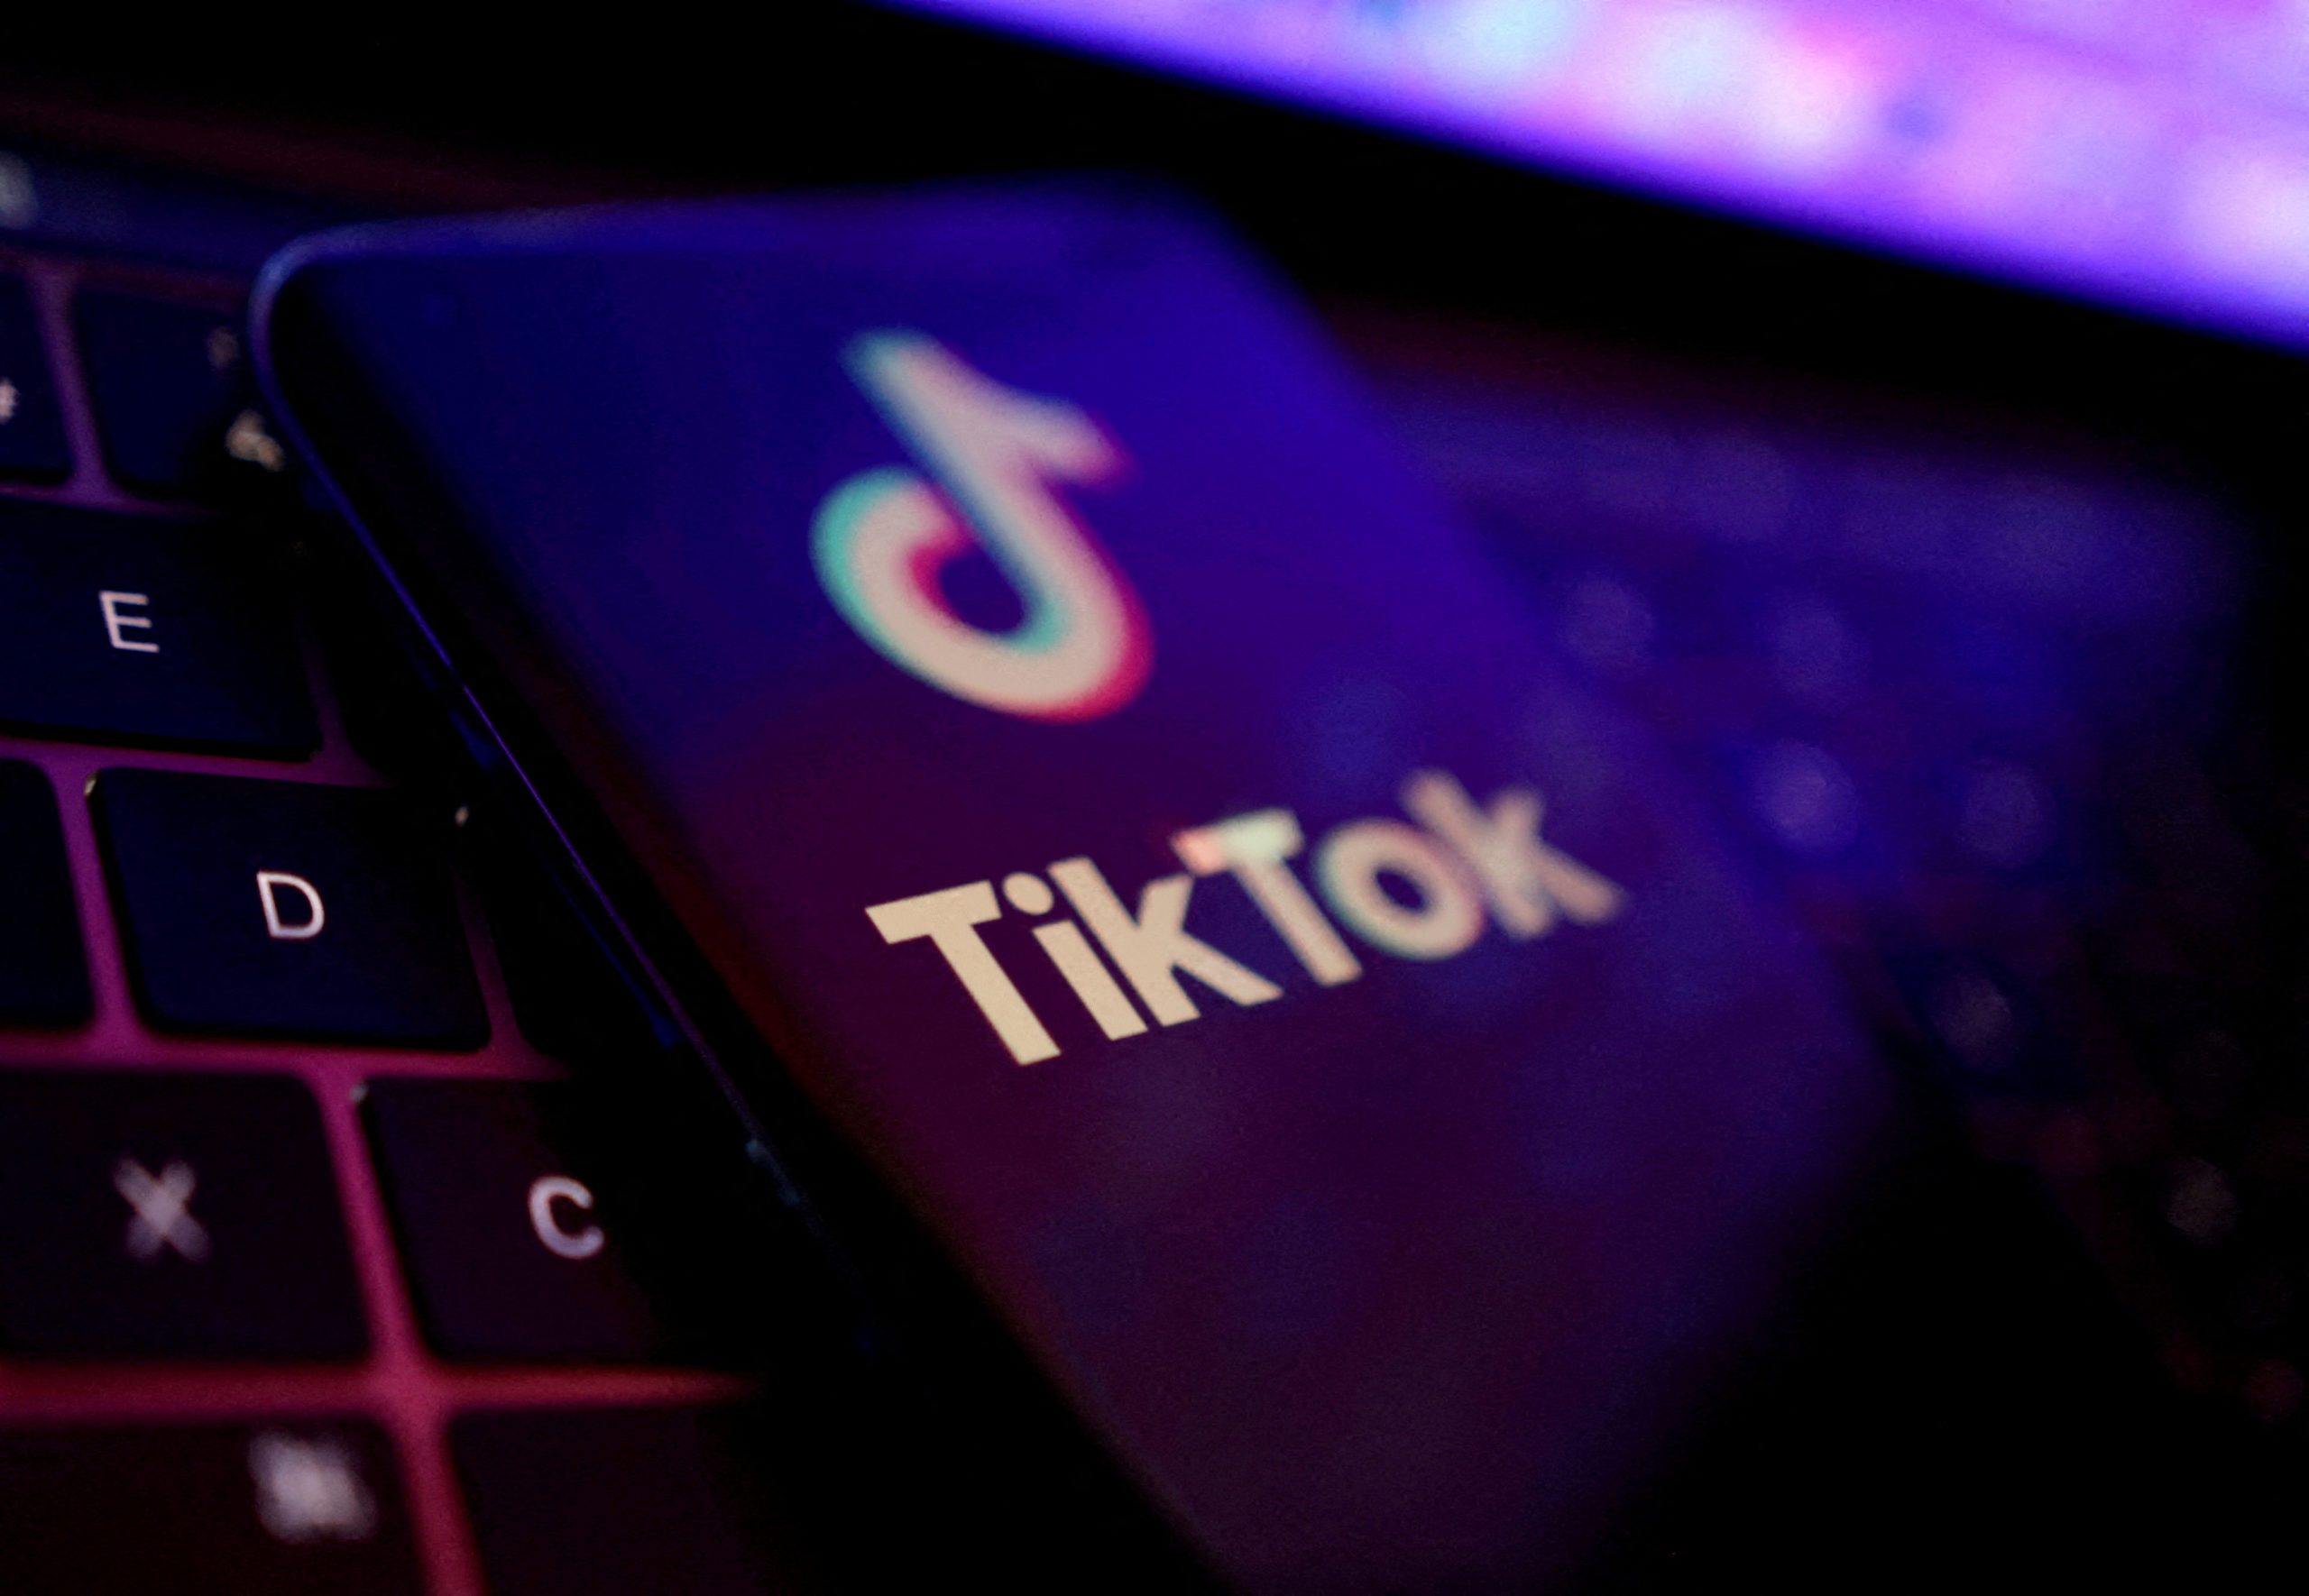 US lawmaker wants TikTok CEO to explain actions to protect children